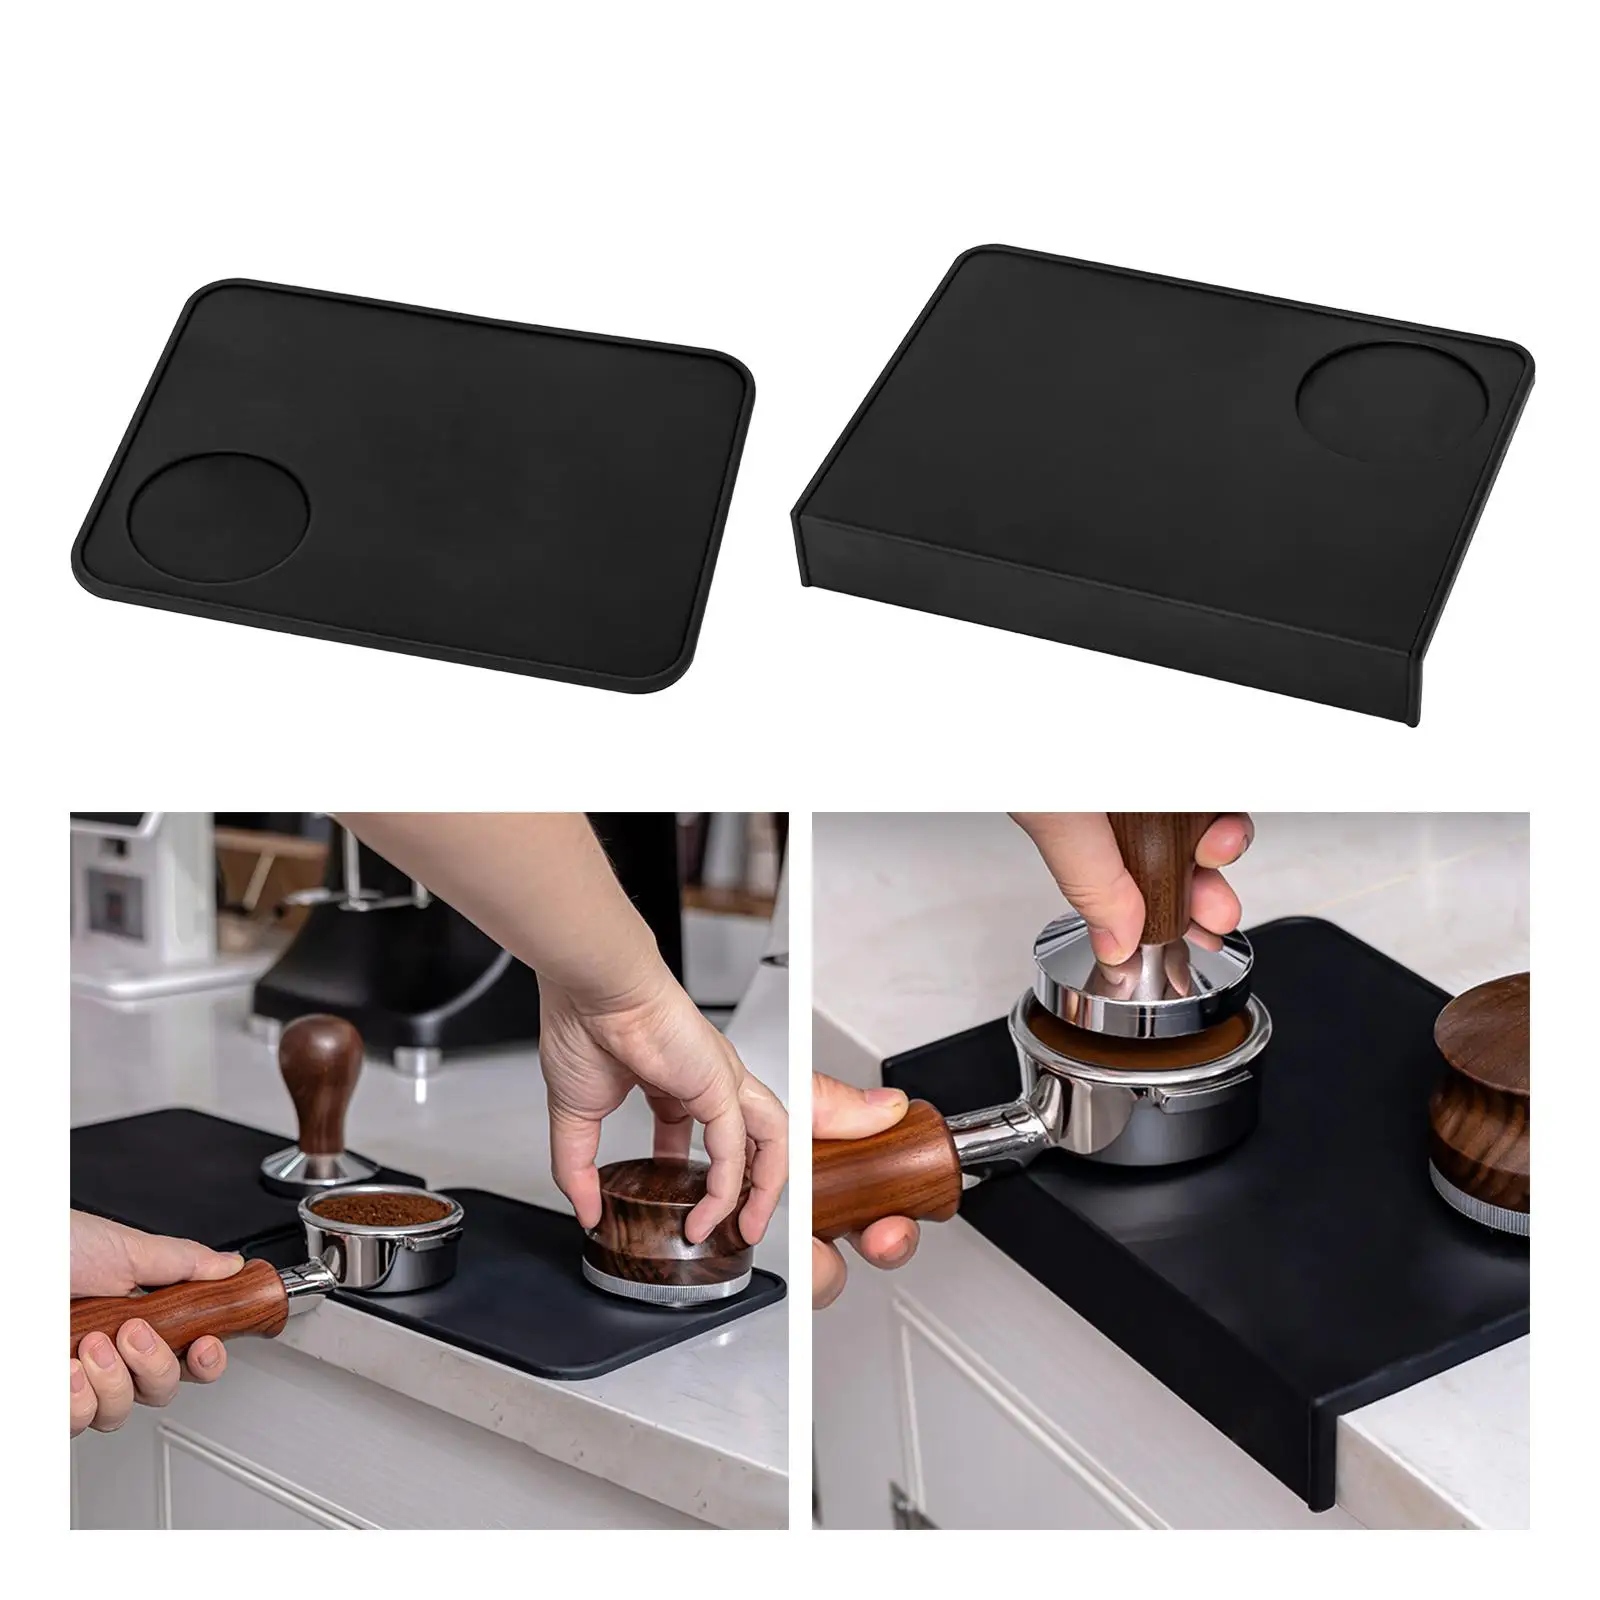 Coffee Tamper Mat Wear Resistant Barista Tool Multifunction Nonslip Professional for Worktop Home Kitchen Coffee Bar Office